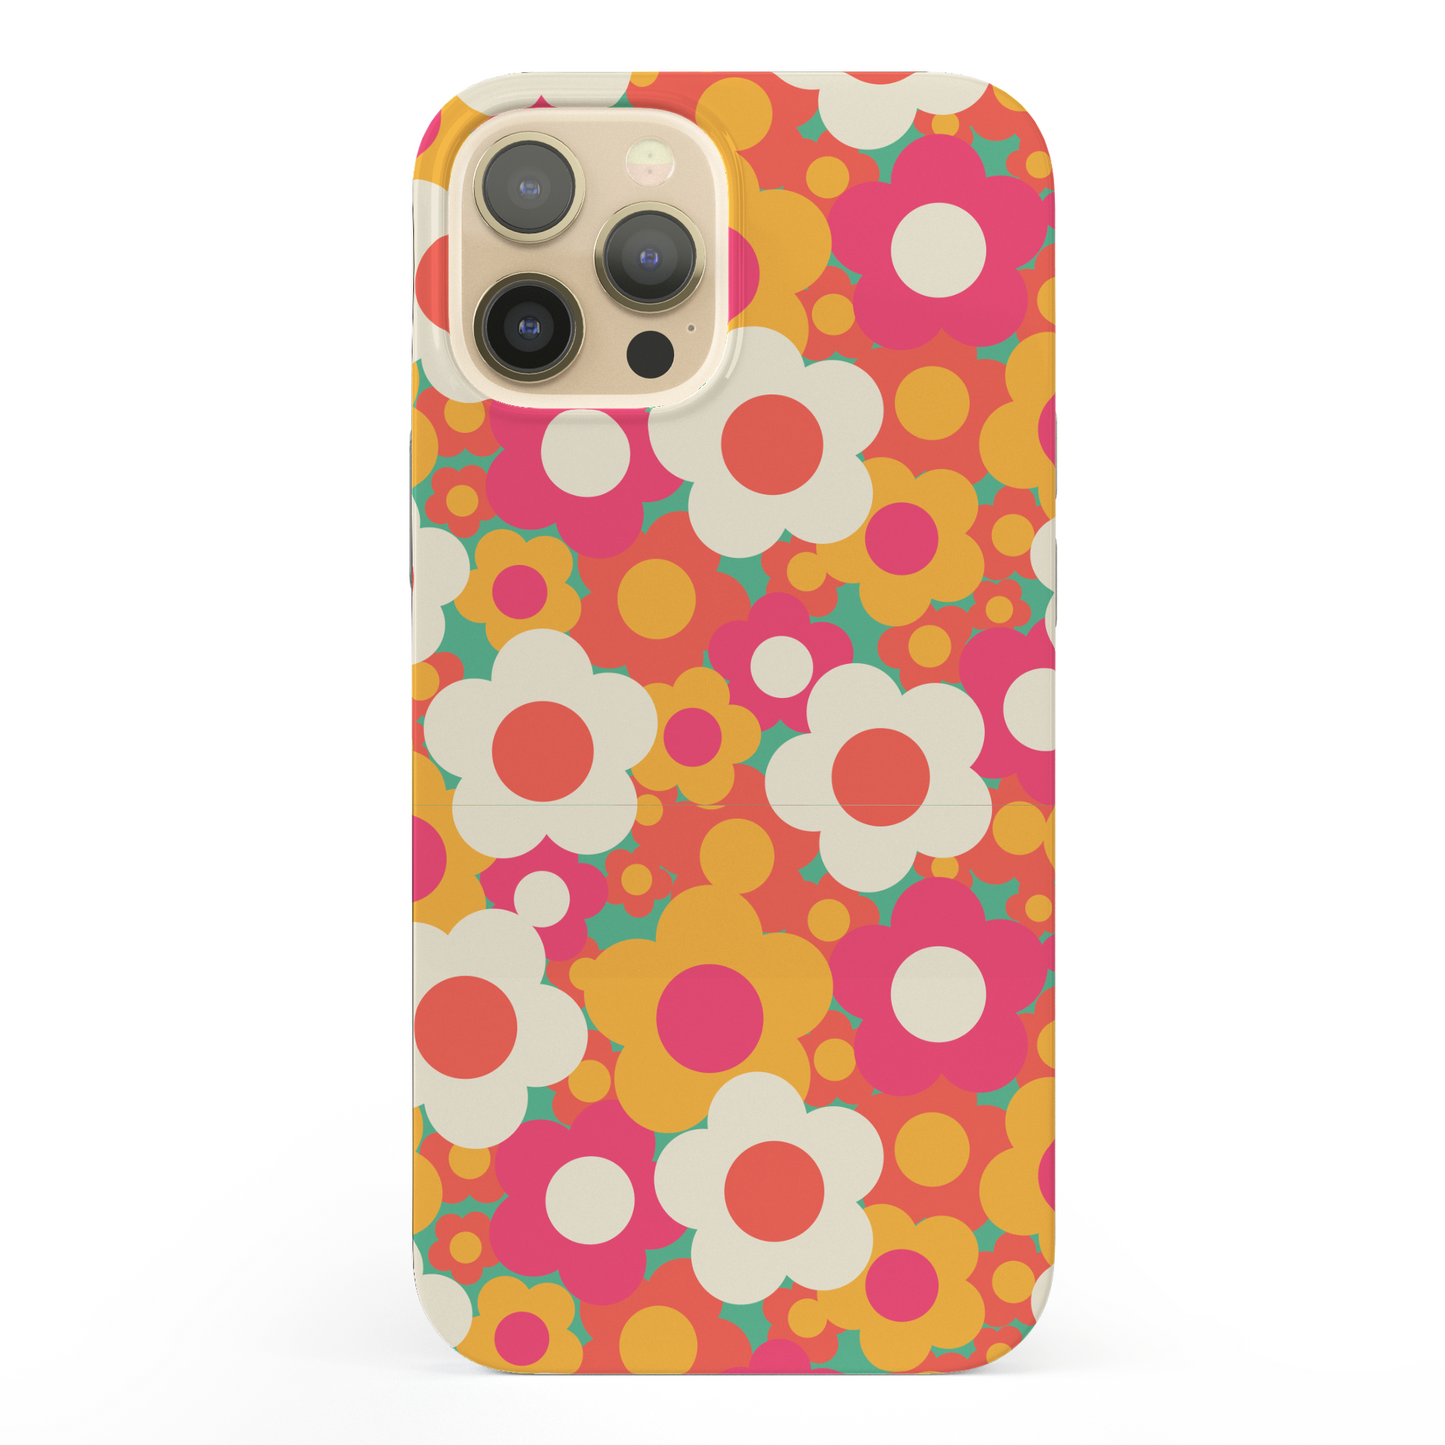 Stay Groovy iPhone 12 Case